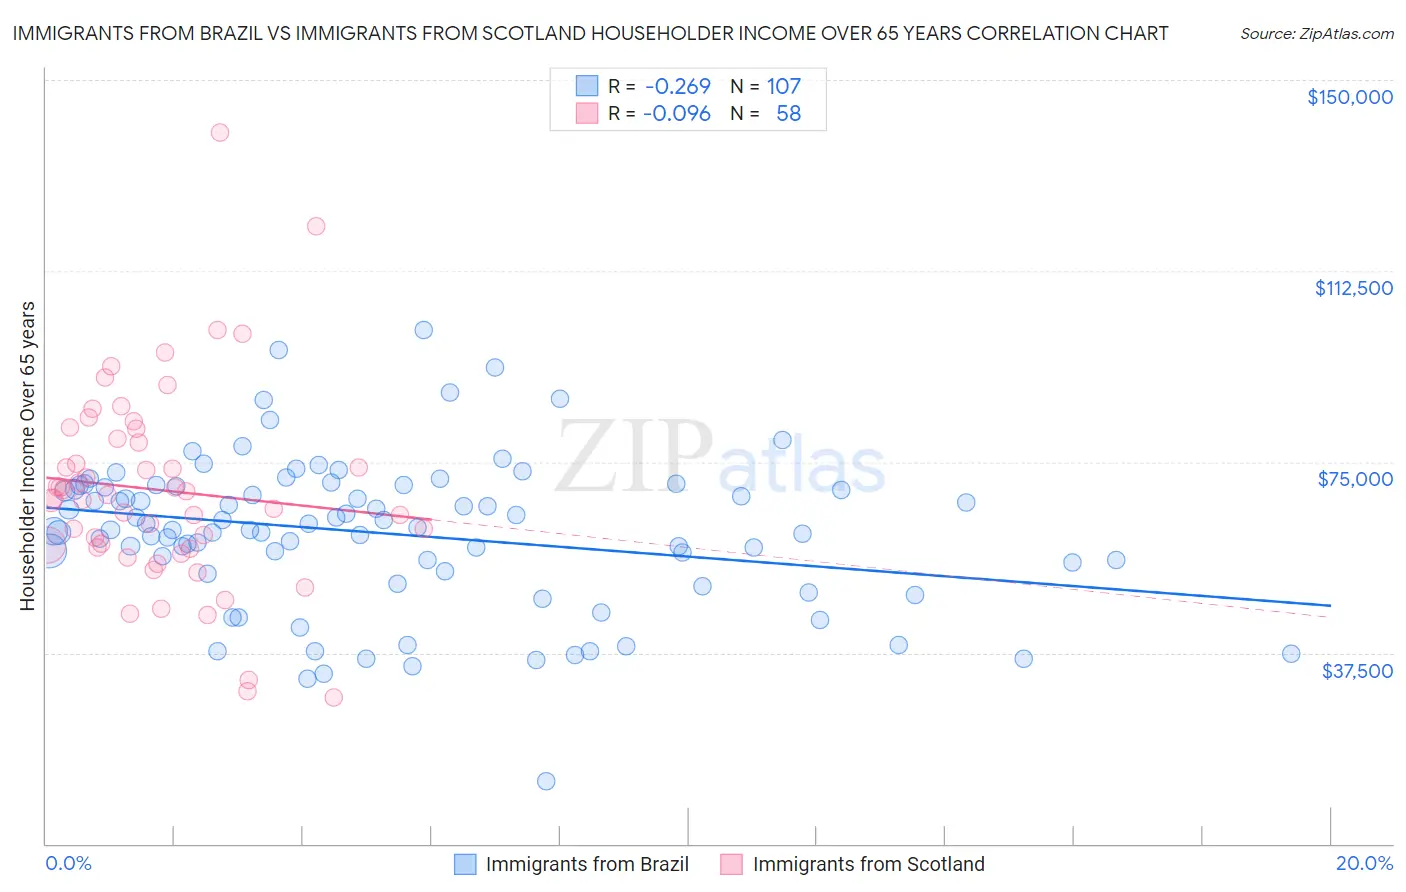 Immigrants from Brazil vs Immigrants from Scotland Householder Income Over 65 years